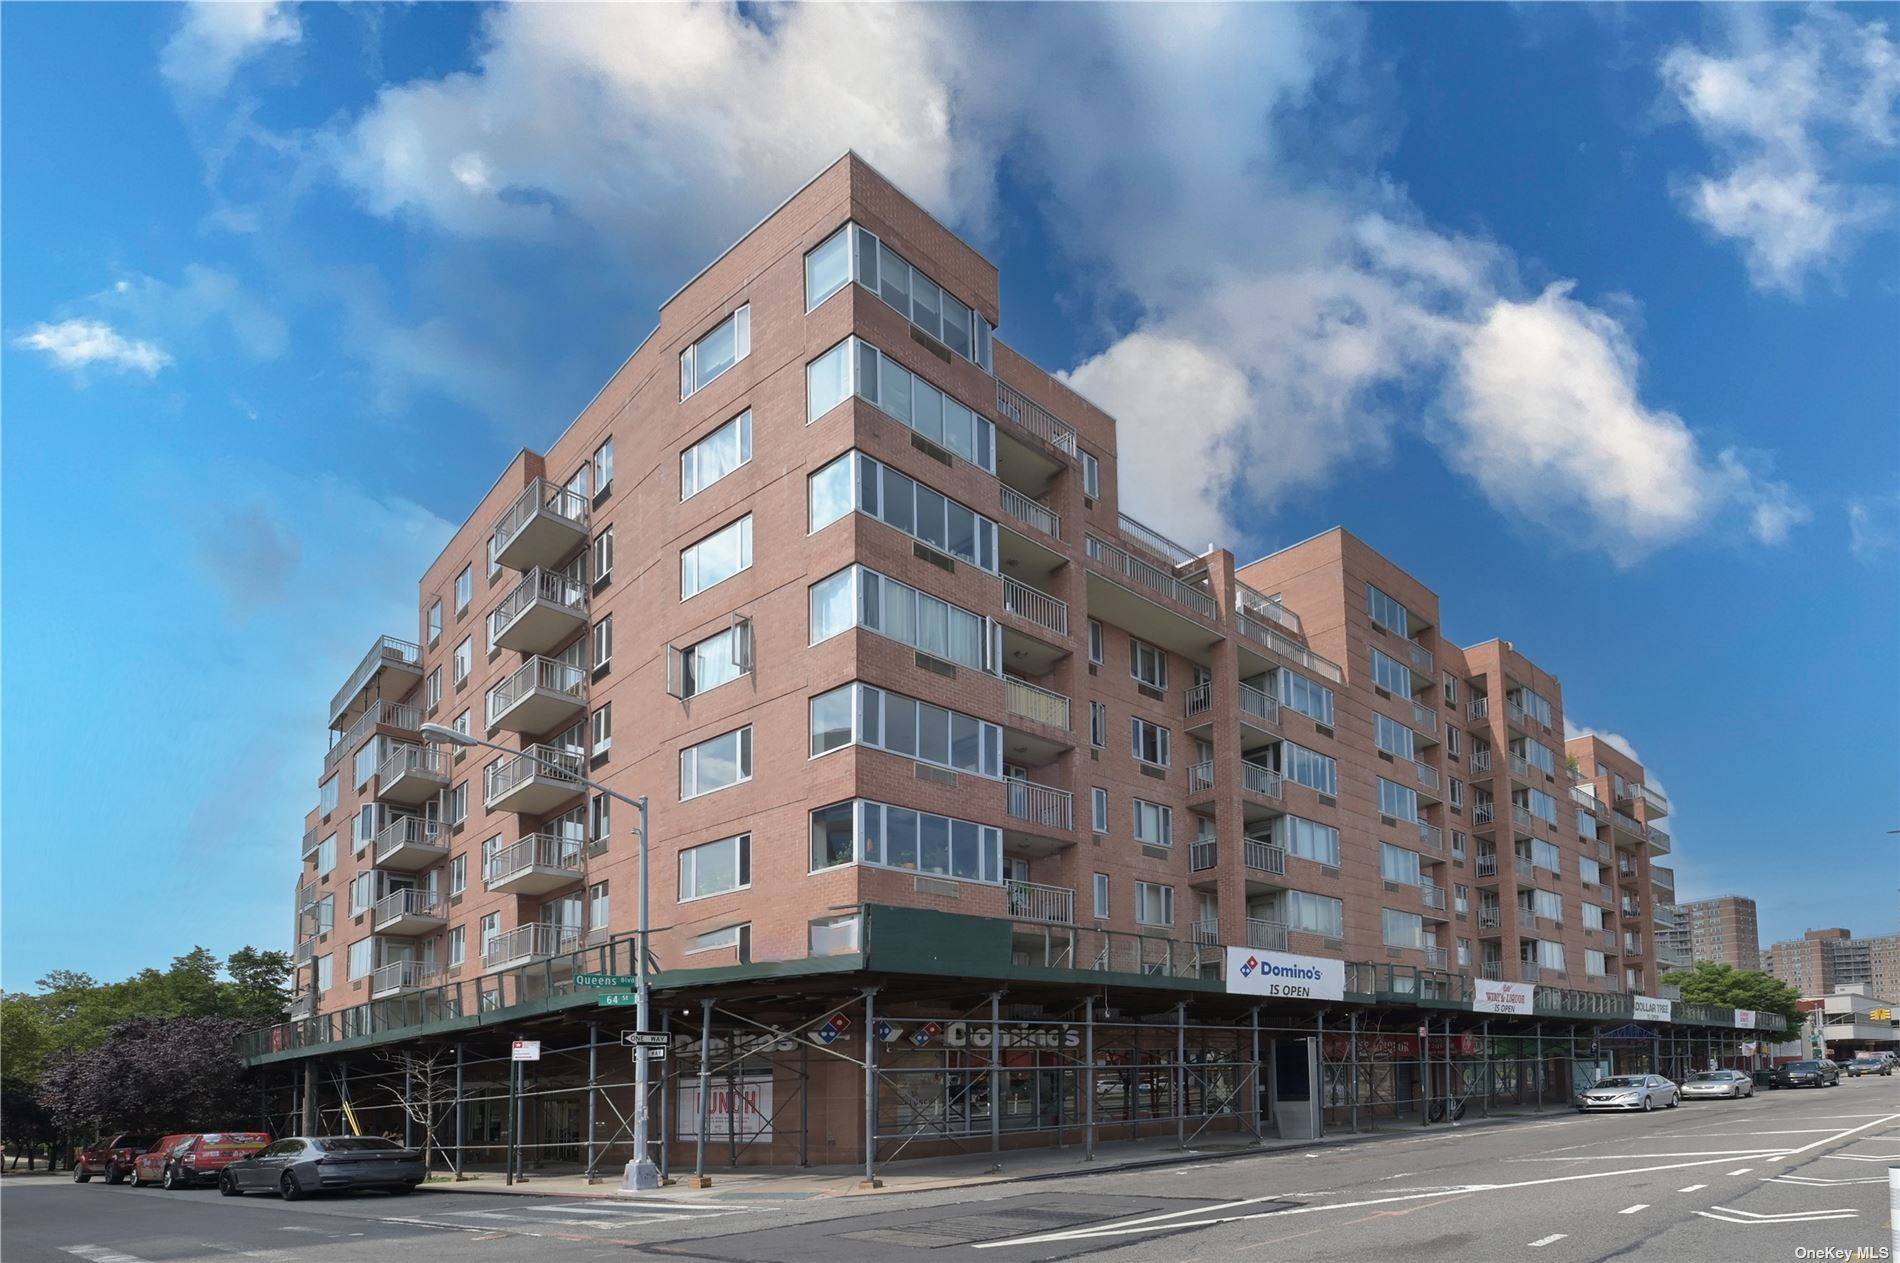 Introducing Woodside Terrace located in the heart of Queens centrally and easily accessible from Astoria, LIC, Sunnyside, Woodside, Elmhurst, Rego Park amp ; More !